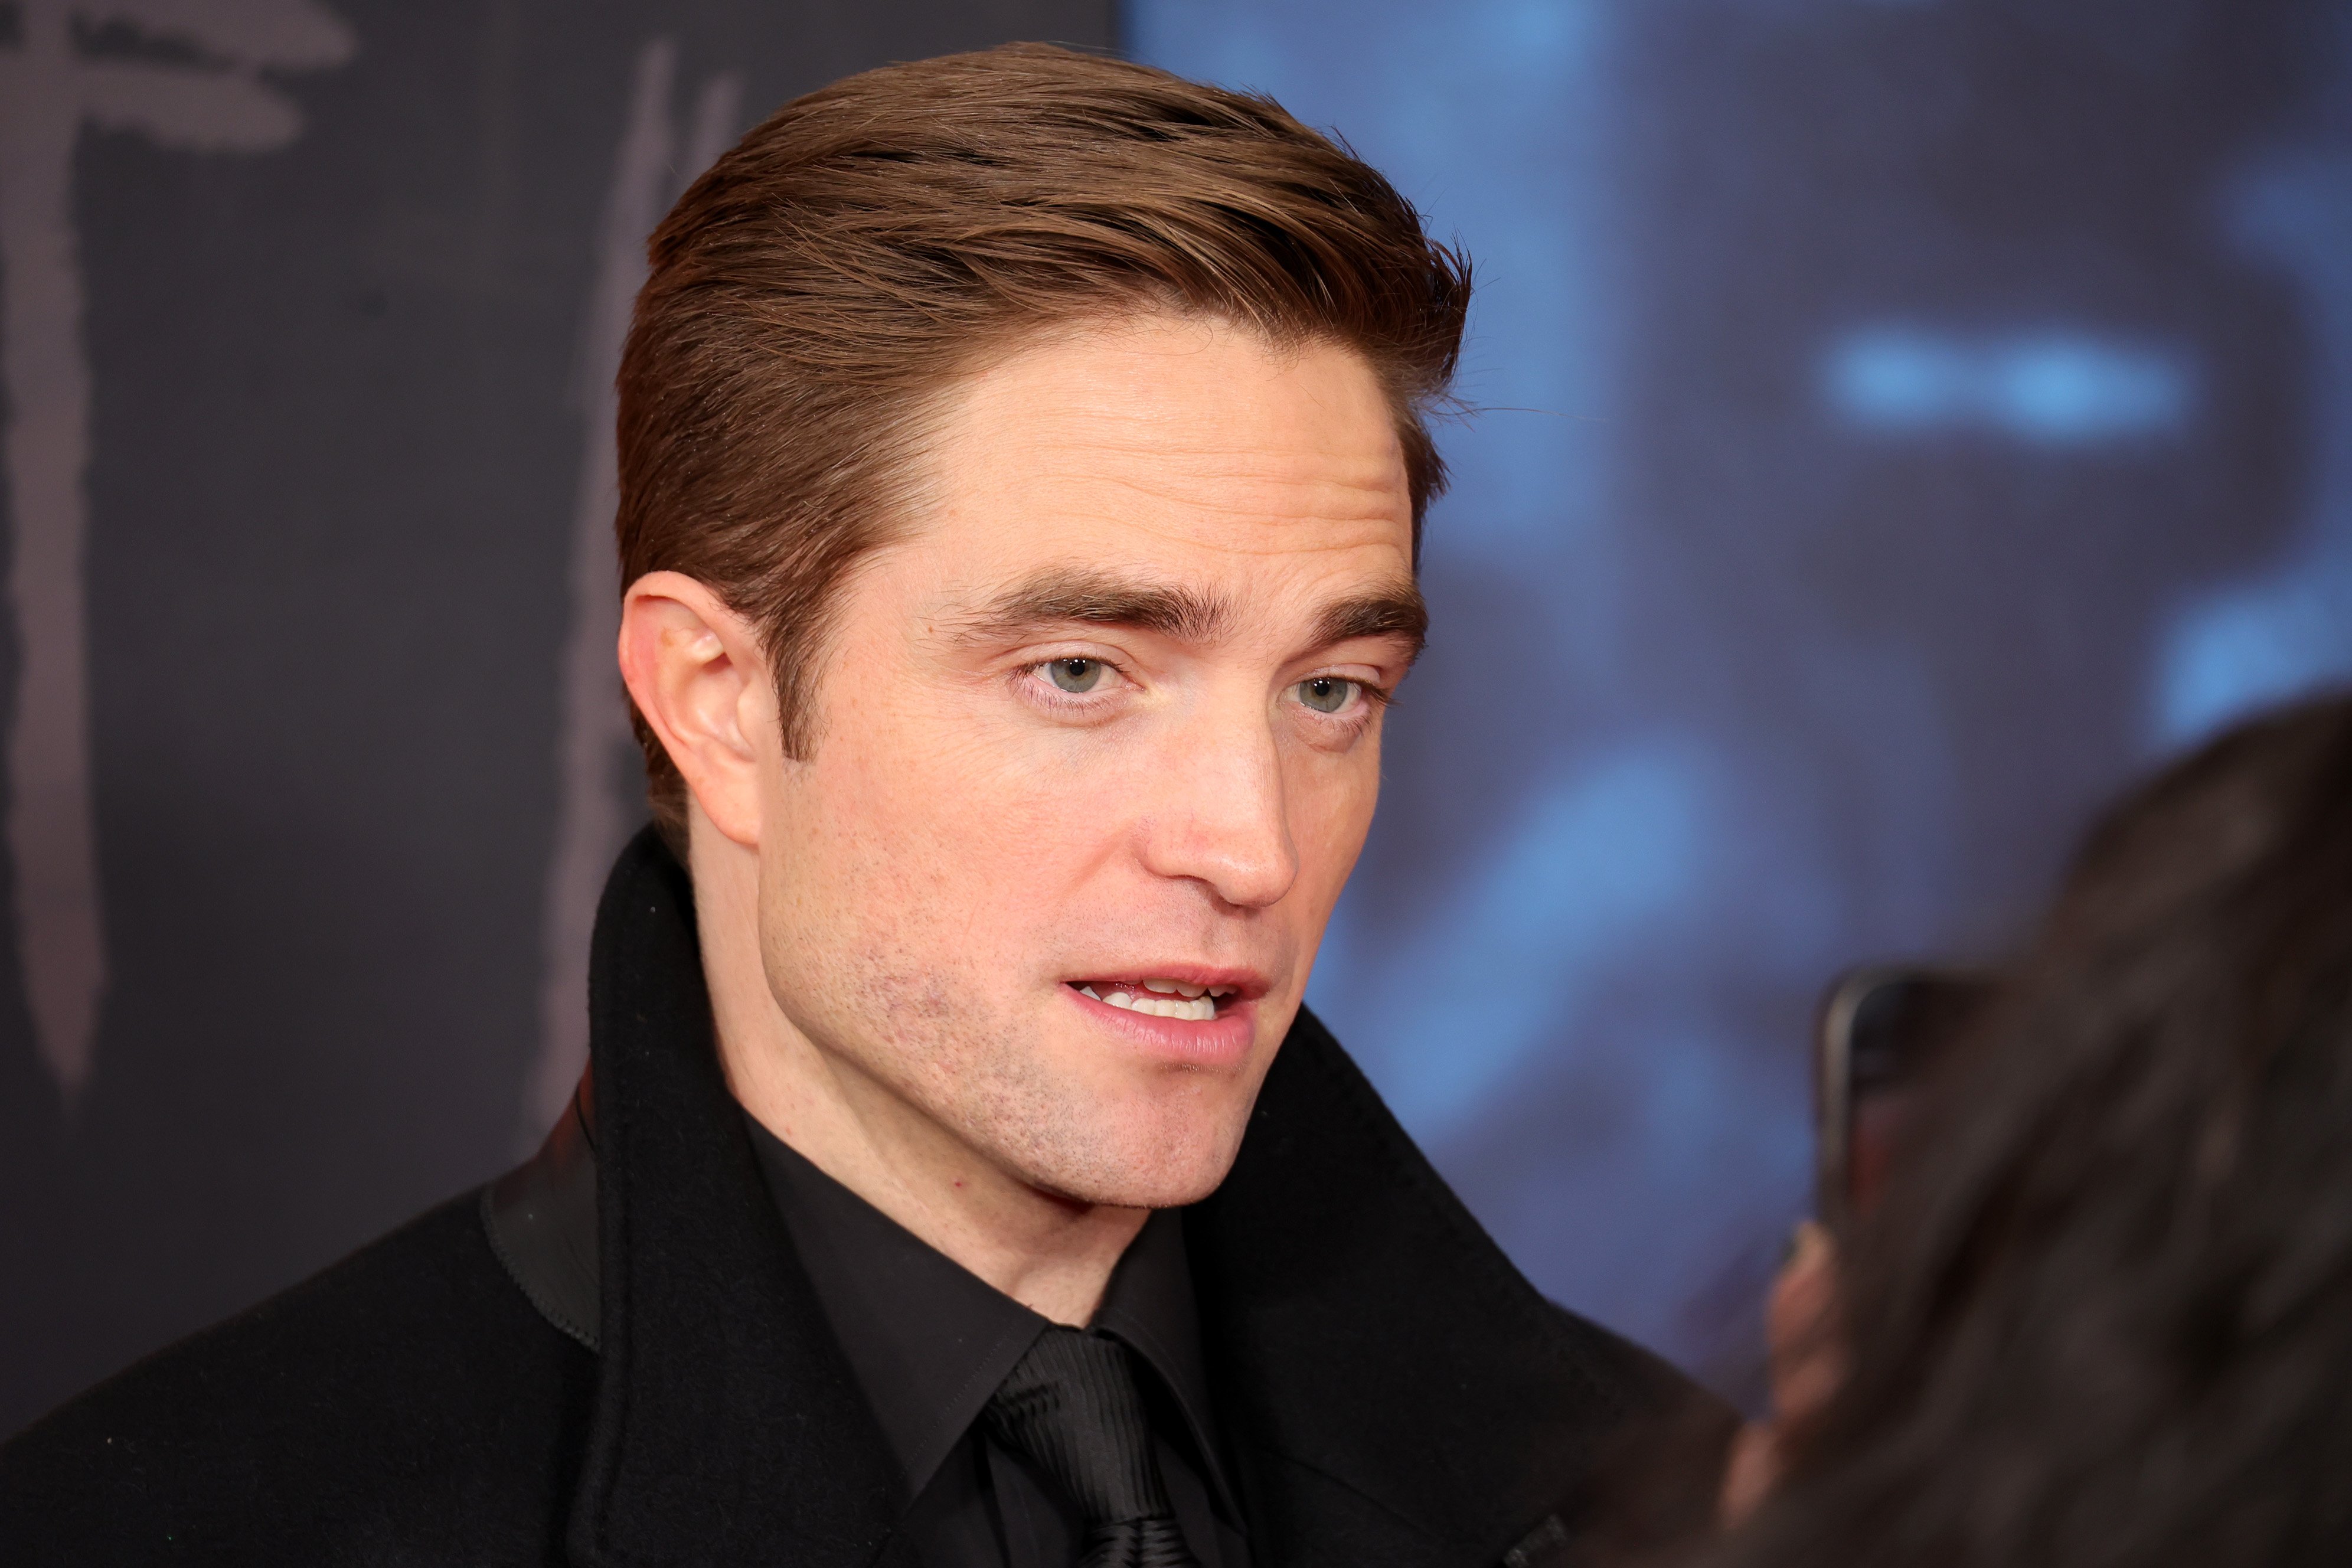 Robert Pattinson at "The Batman" world premiere on March 1, 2022, in New York City. | Source: Getty Images